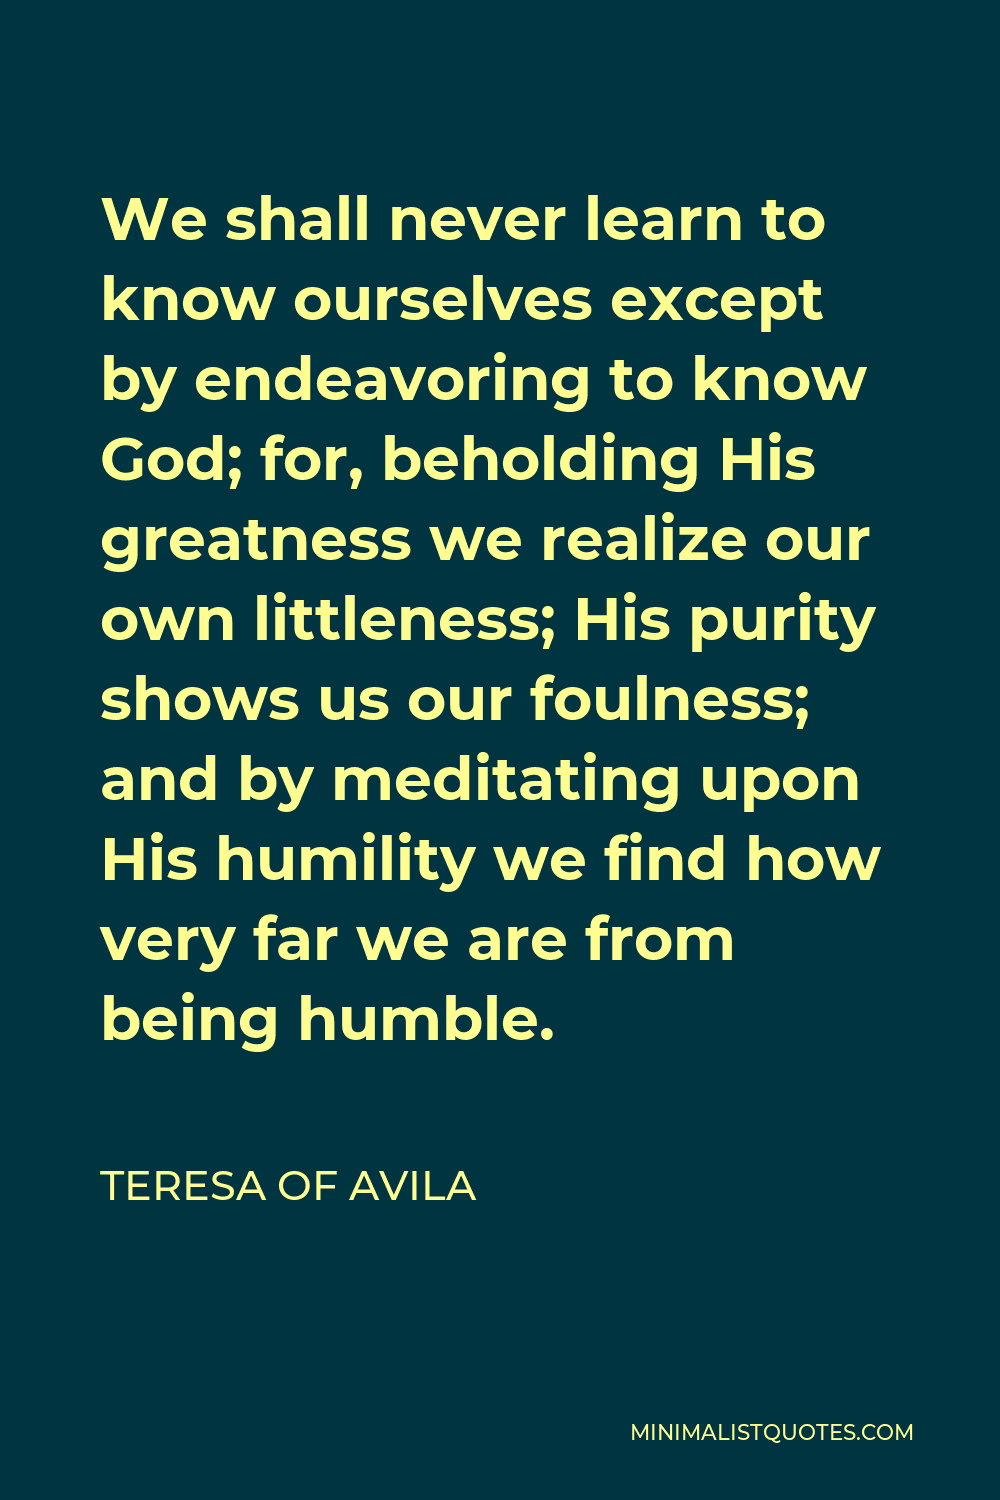 Teresa of Avila Quote - We shall never learn to know ourselves except by endeavoring to know God; for, beholding His greatness we realize our own littleness; His purity shows us our foulness; and by meditating upon His humility we find how very far we are from being humble.